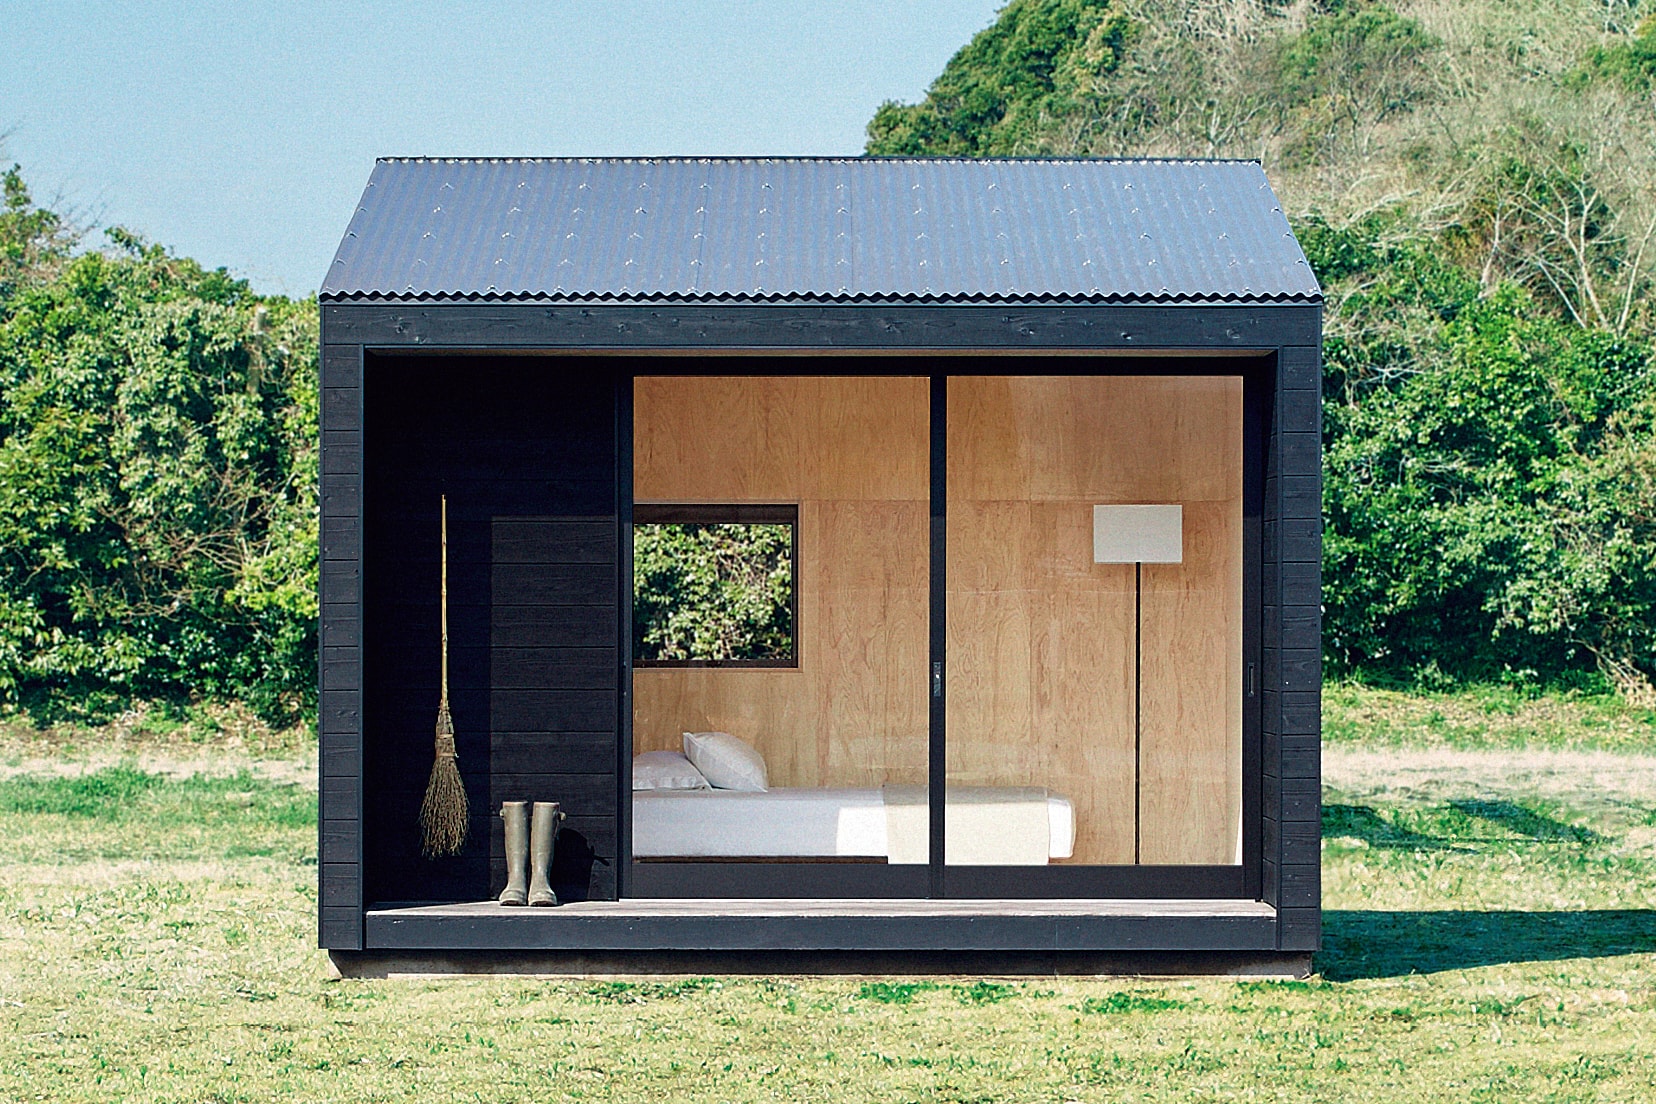 MUJI Tiny Huts Architecture Design Home-goods Spaces